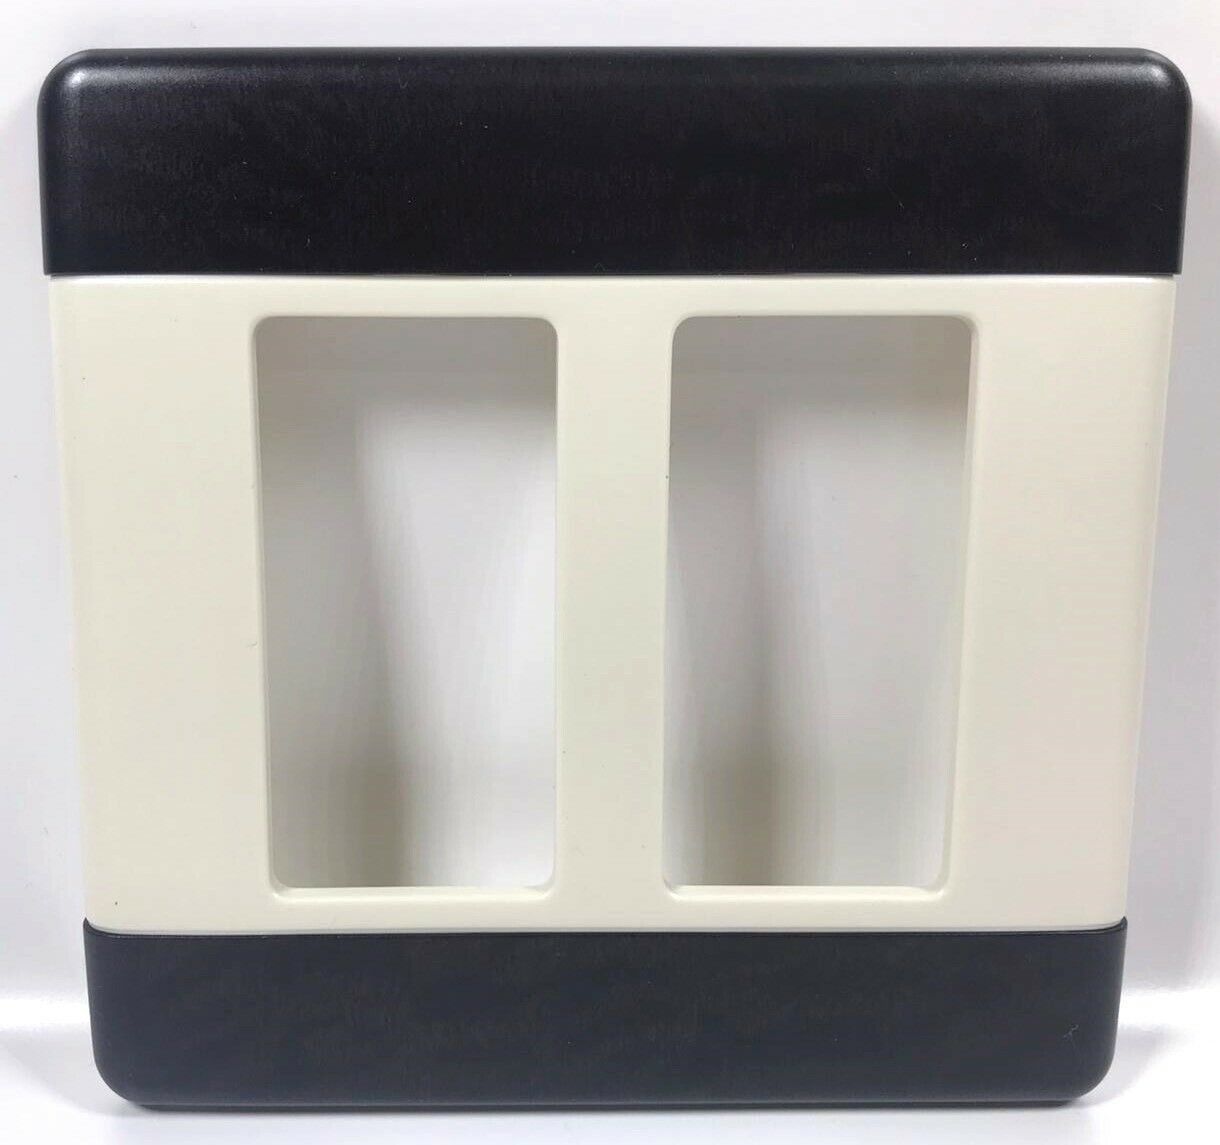 Primary image for Pass & Seymour Straight Style Wall Plate 2 Gang L. Almond/Aged Bronze